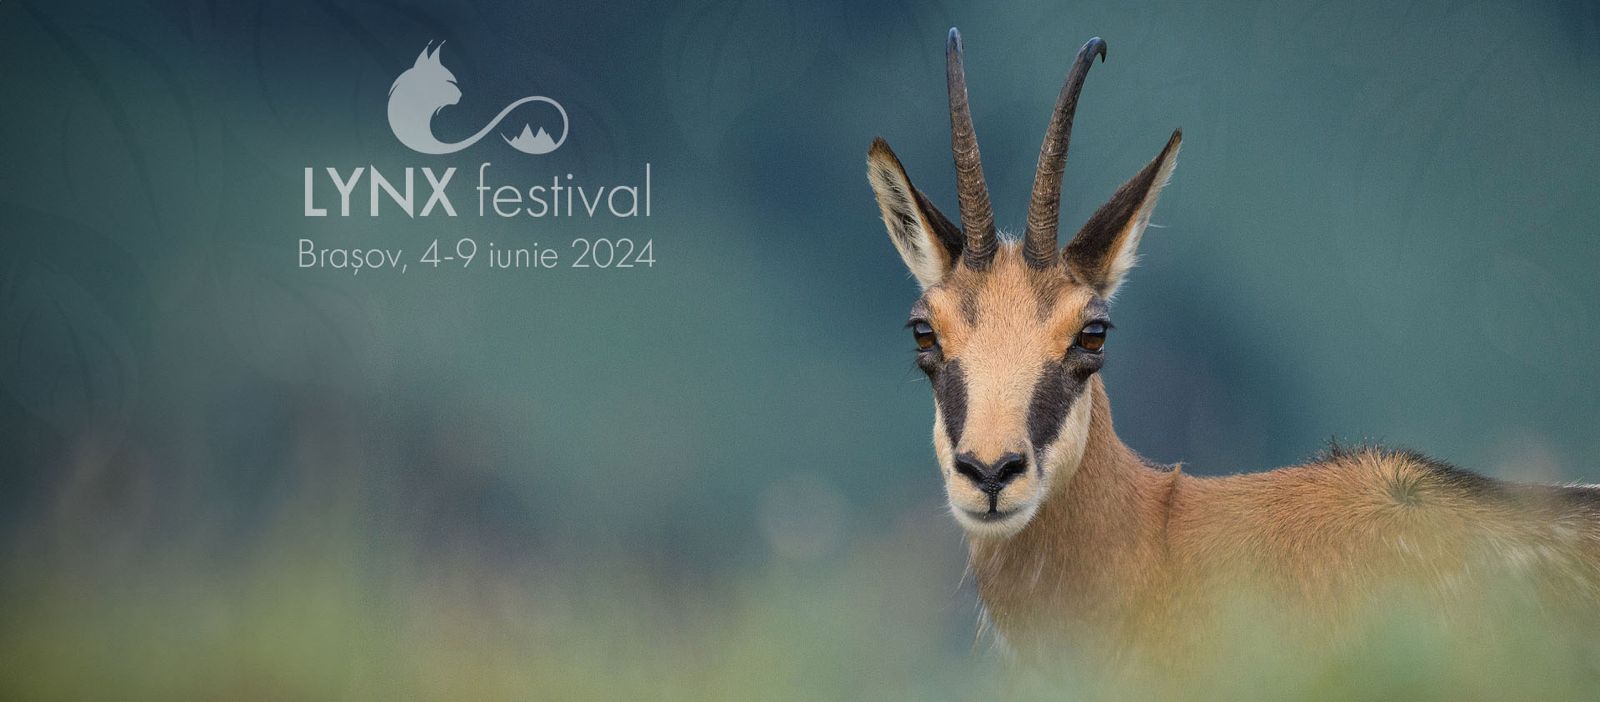 The 2nd edition of LYNX Festival will take place between June 4 – 9